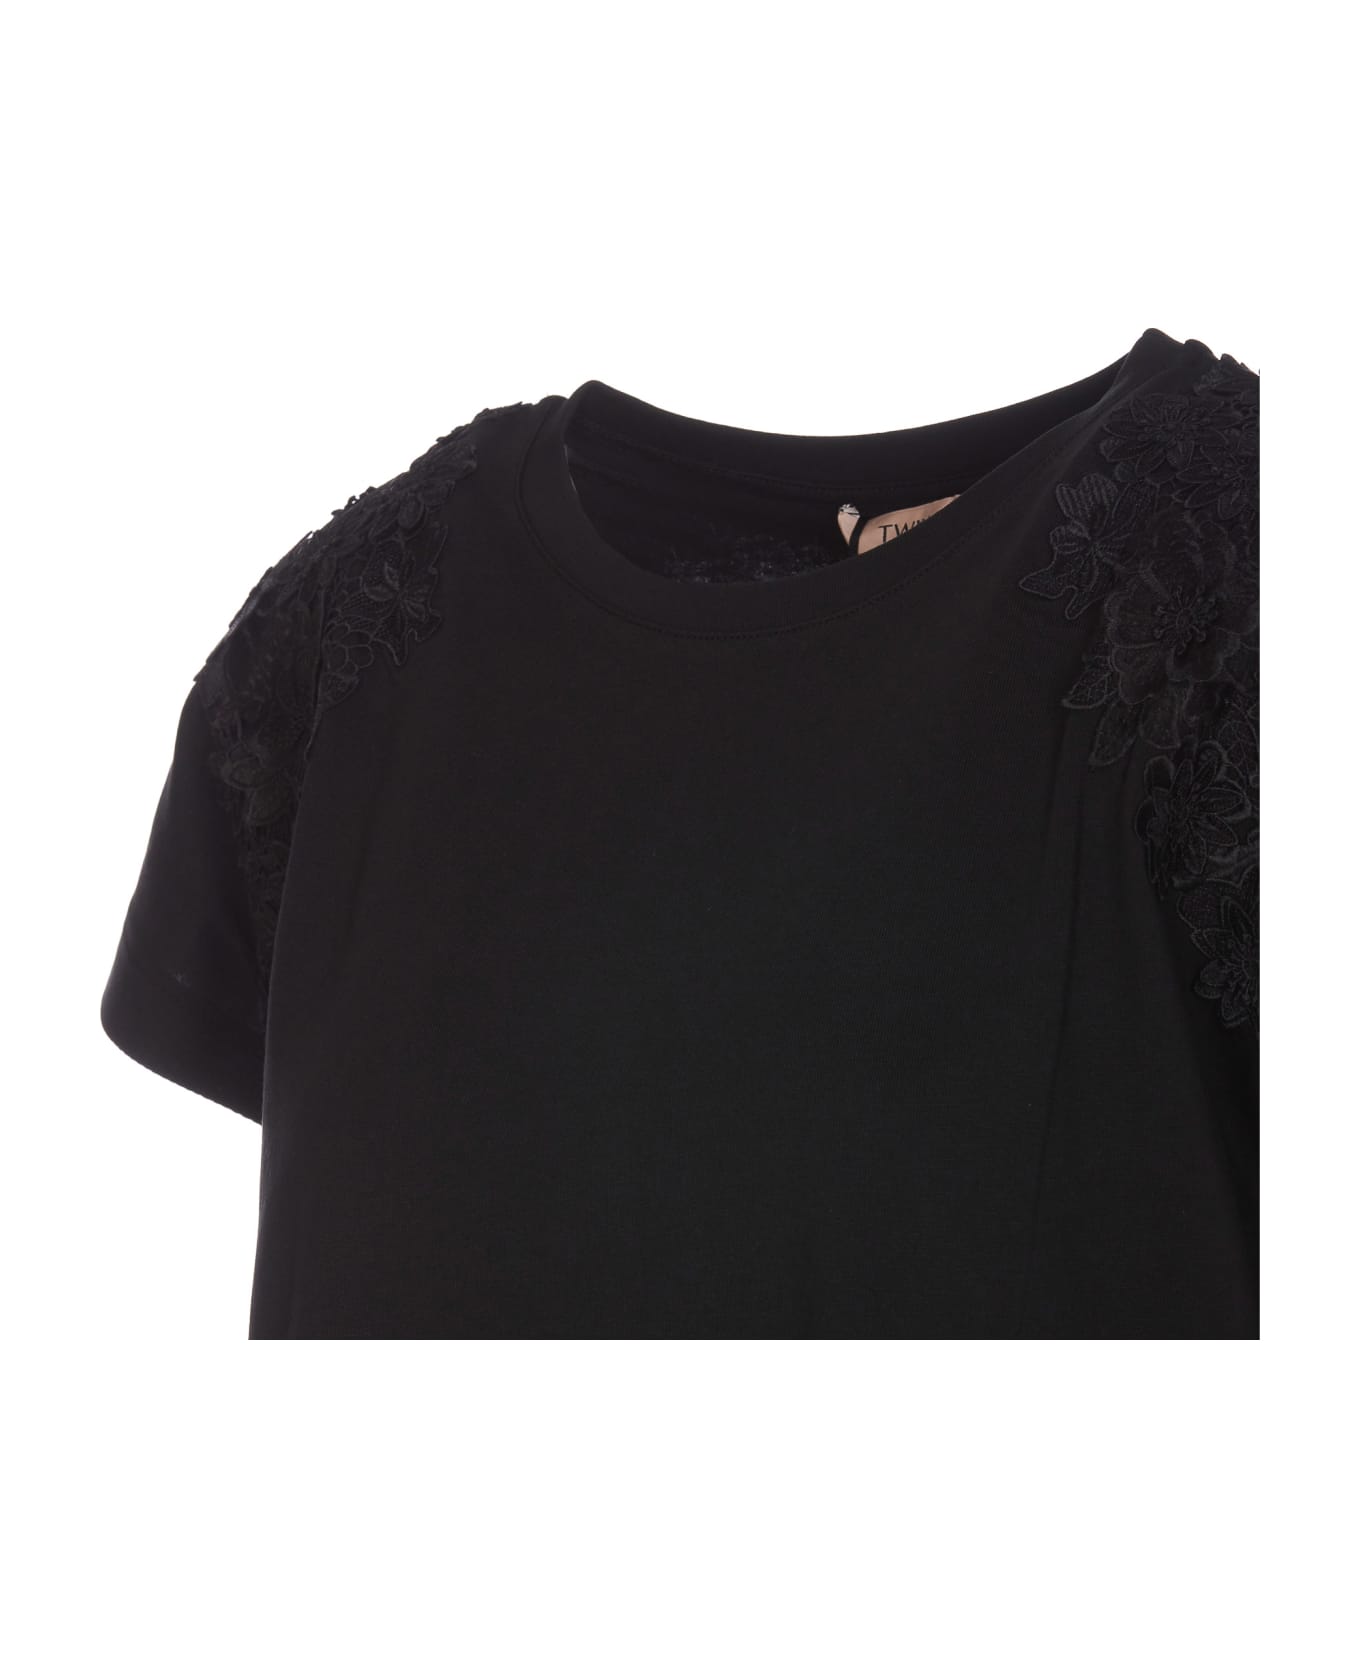 TwinSet T-shirt With Lace Details - Black